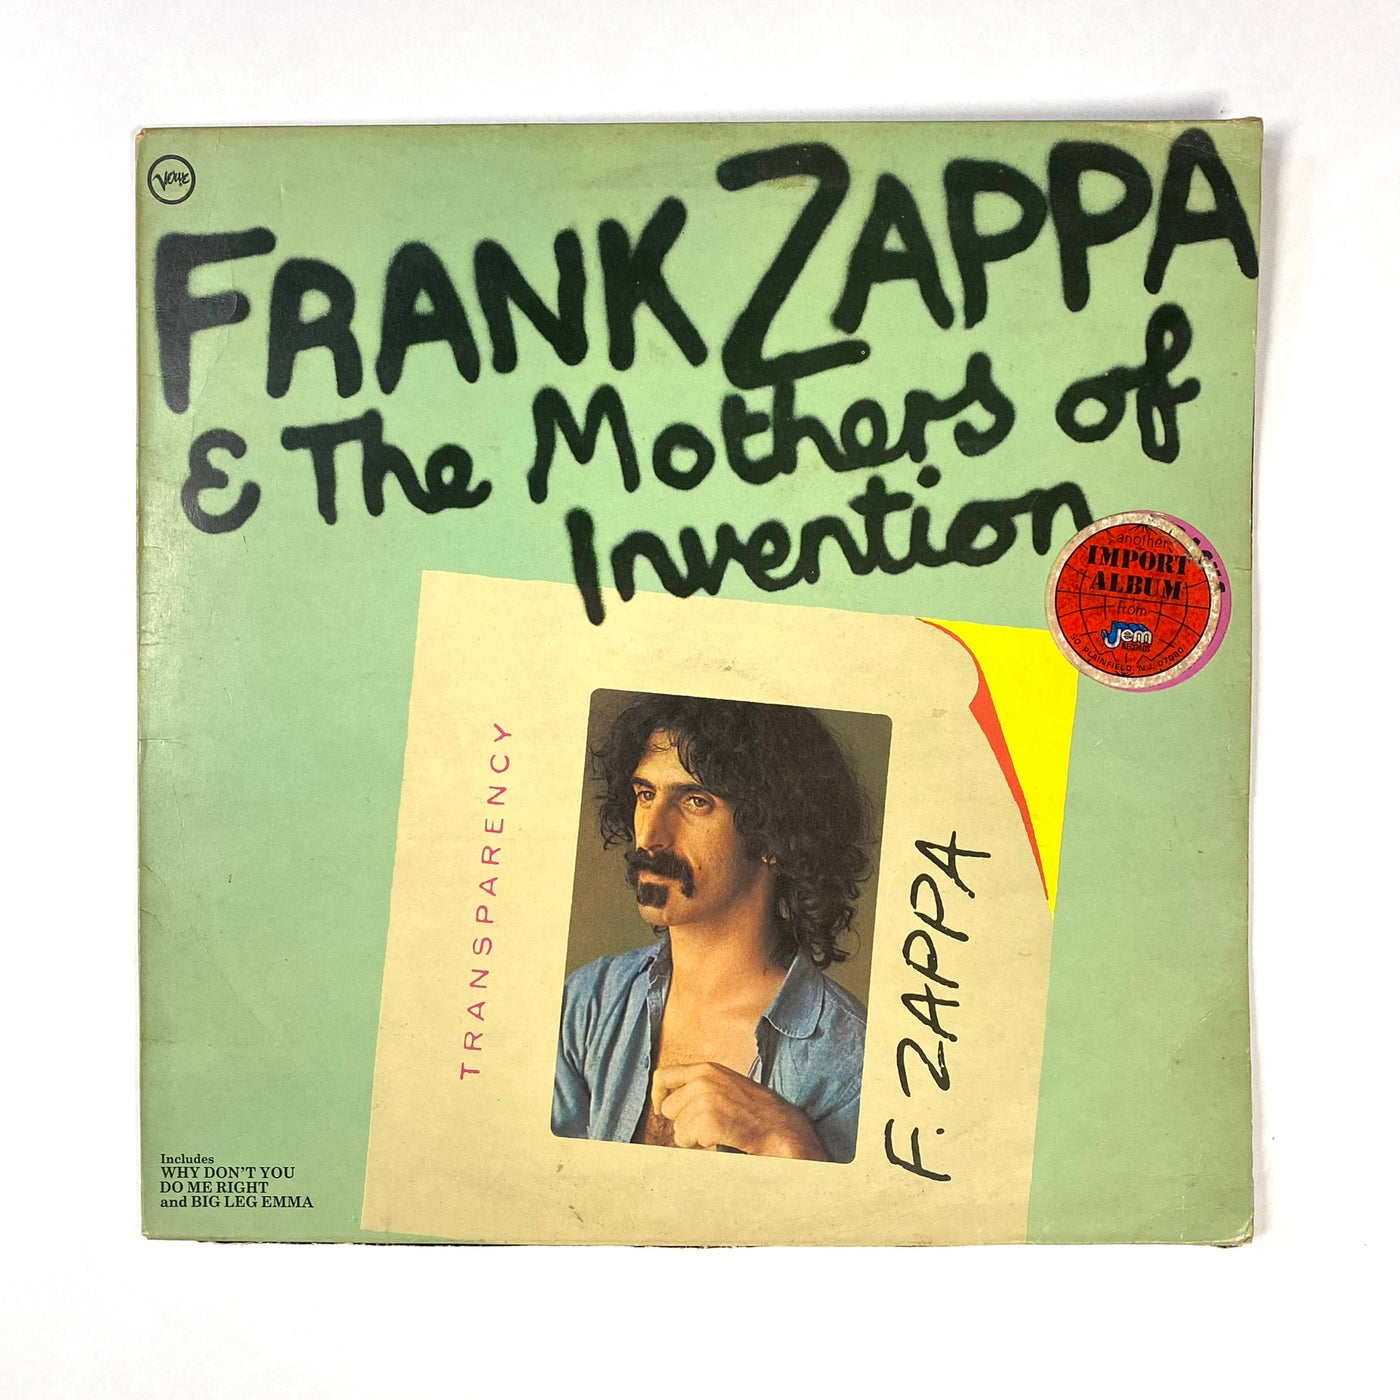 Frank Zappa & The Mothers - Frank Zappa & The Mothers Of Invention